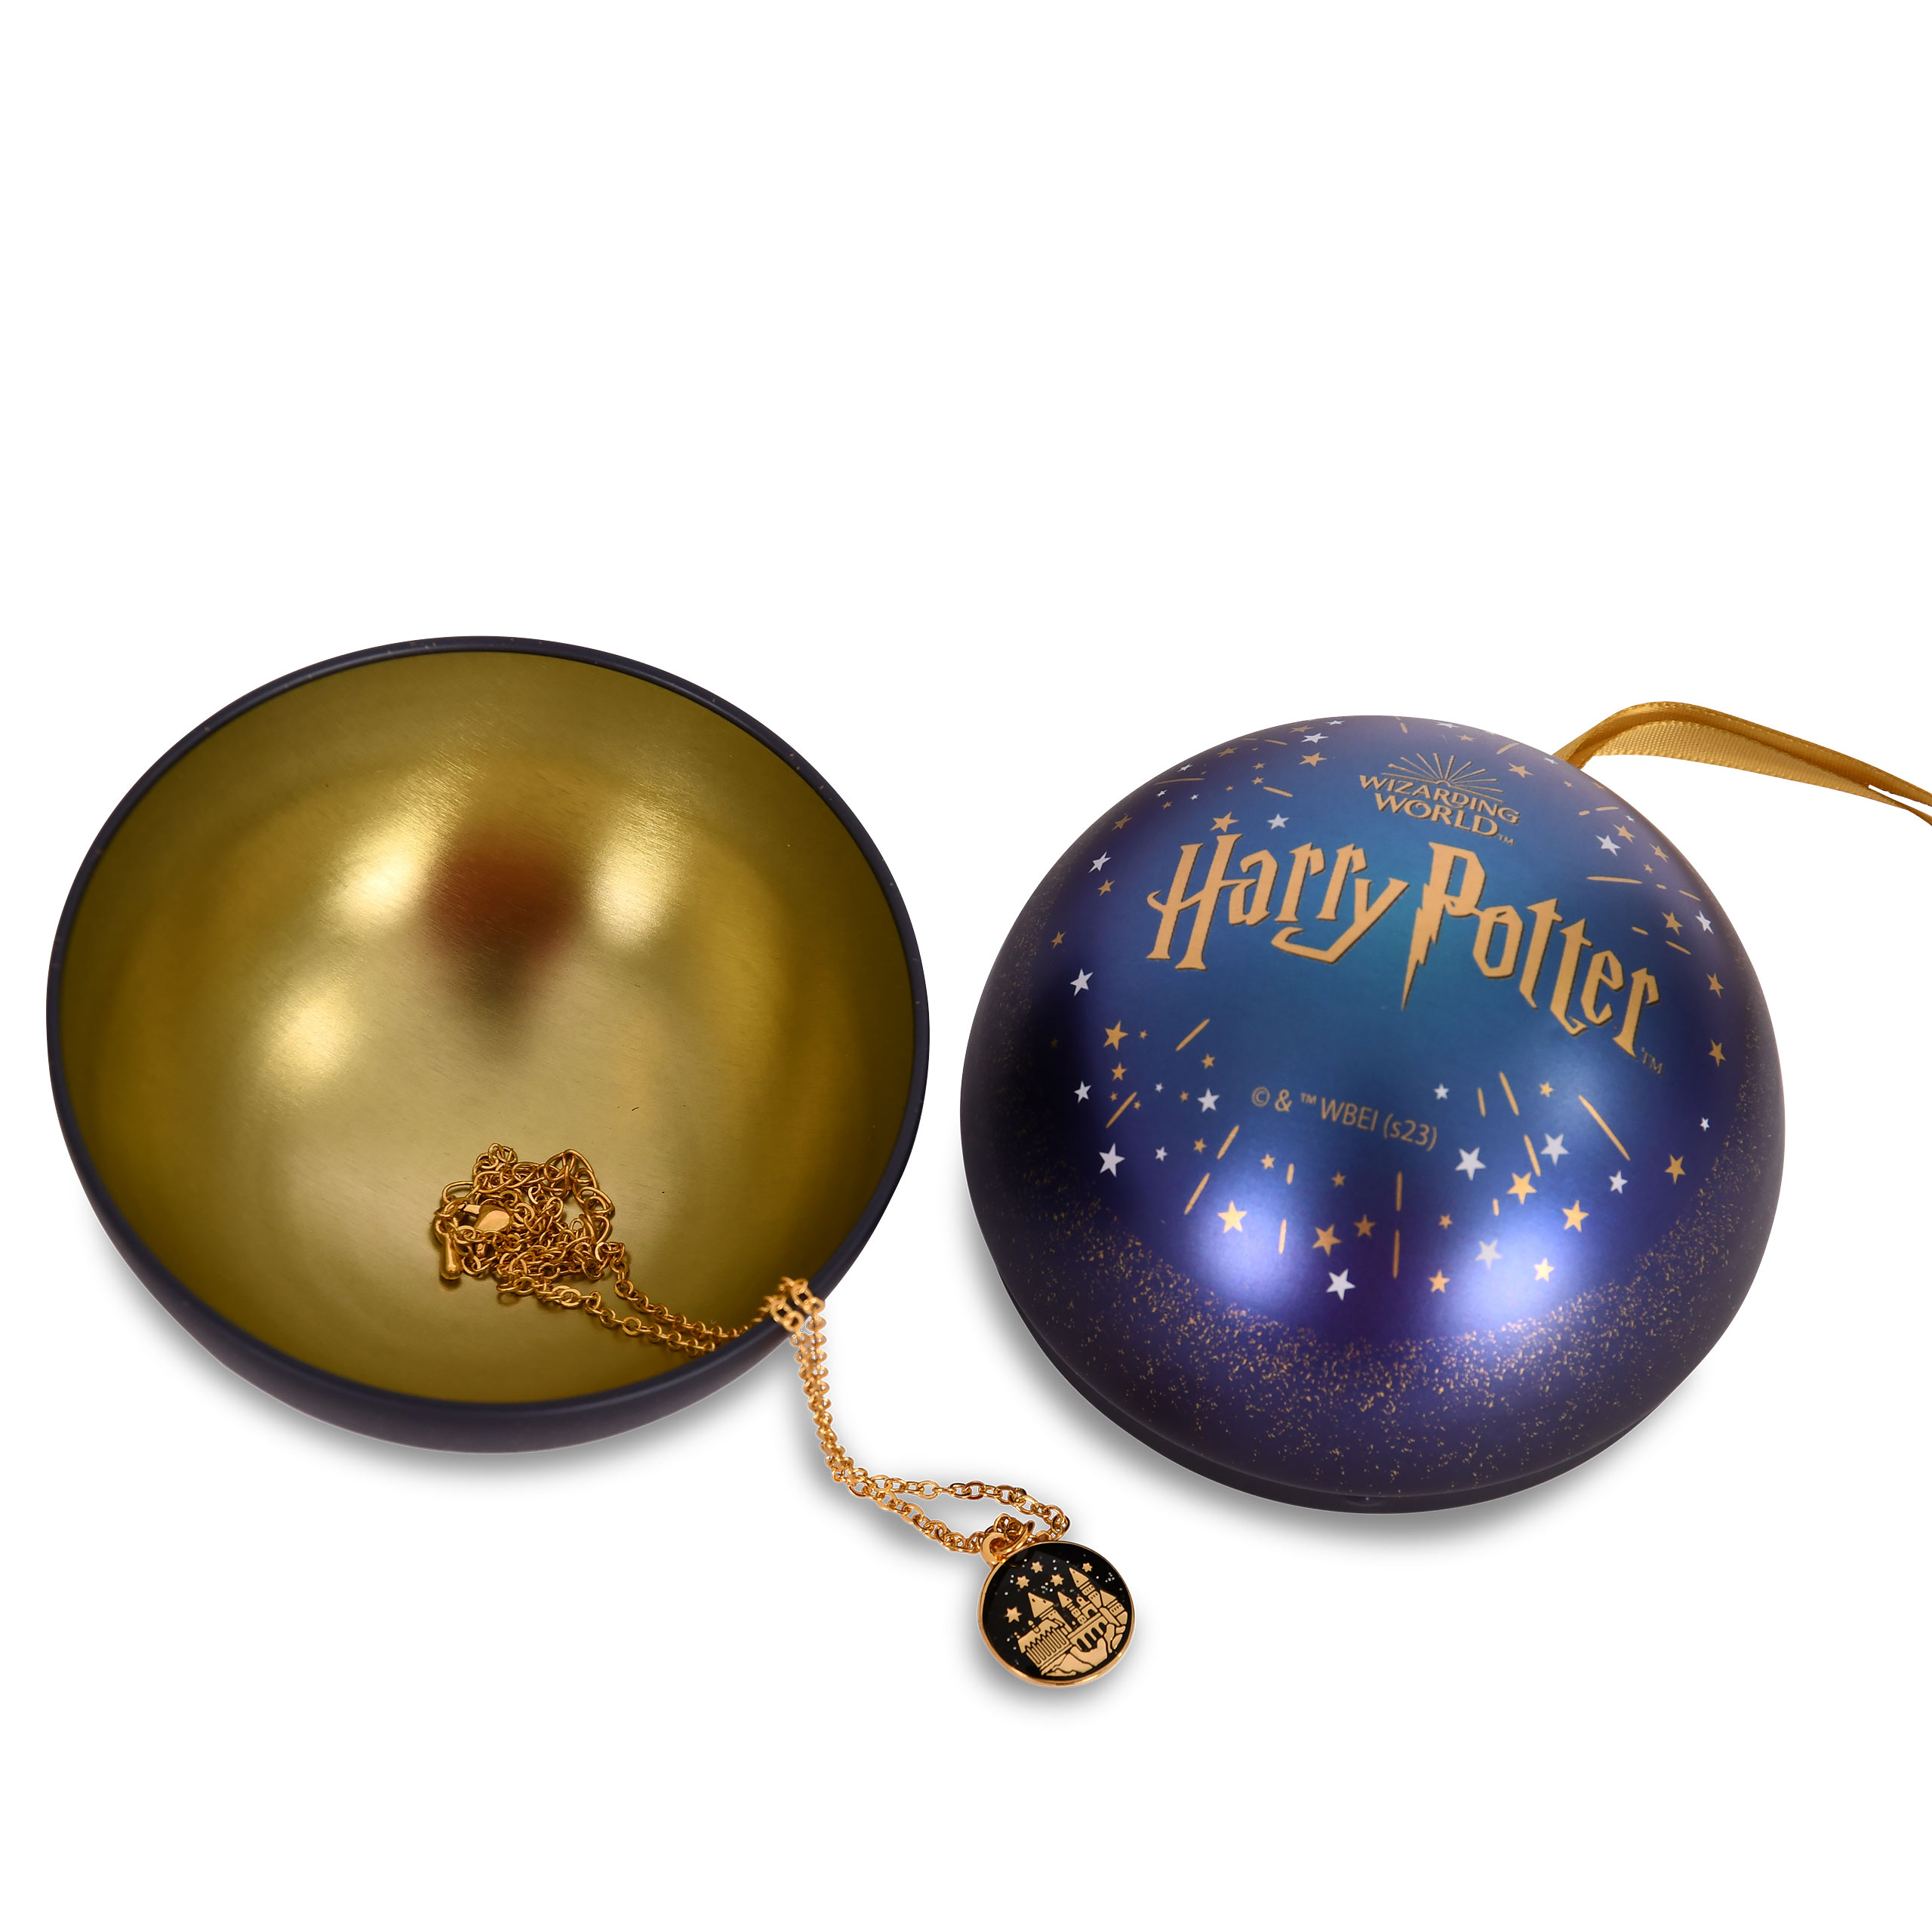 Harry Potter - Hogwarts School of Witchcraft Christmas Ornament with Chain